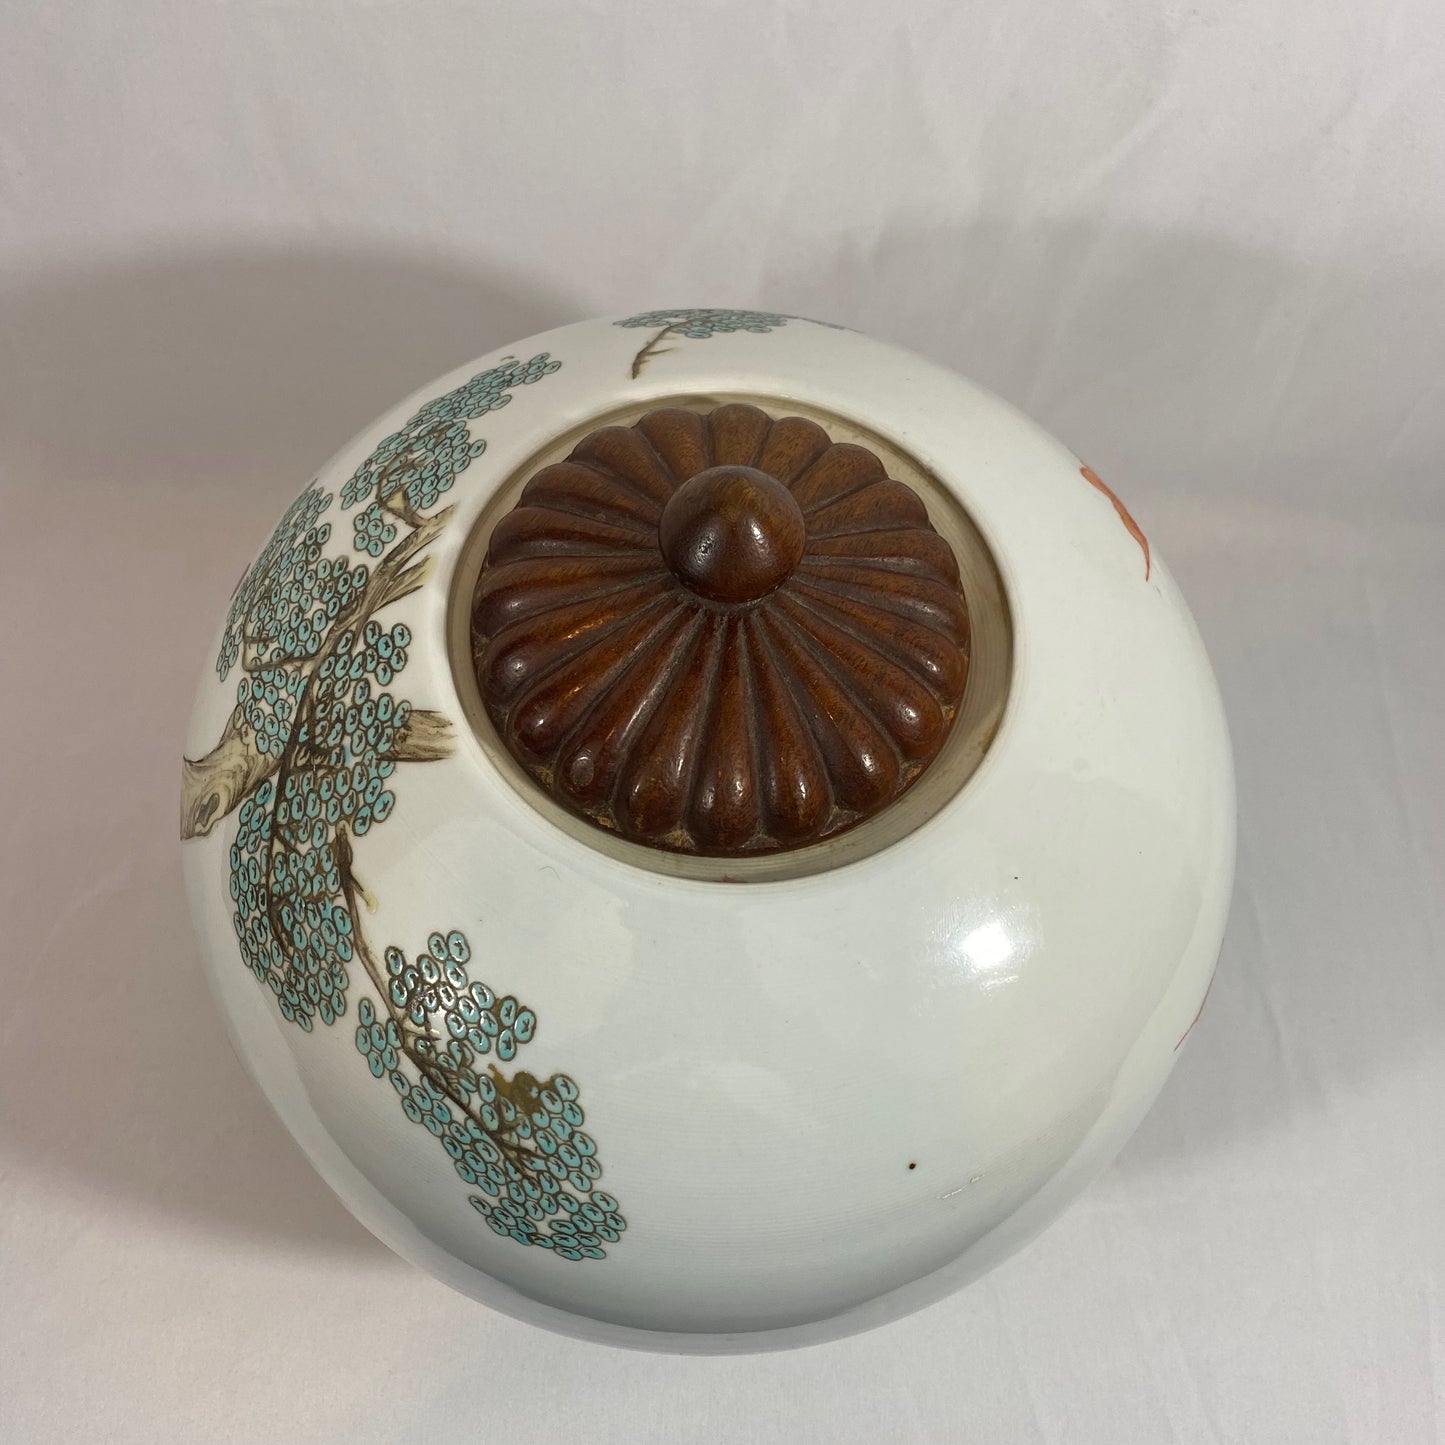 20th Century Chinese Famille Rose Melon Jar